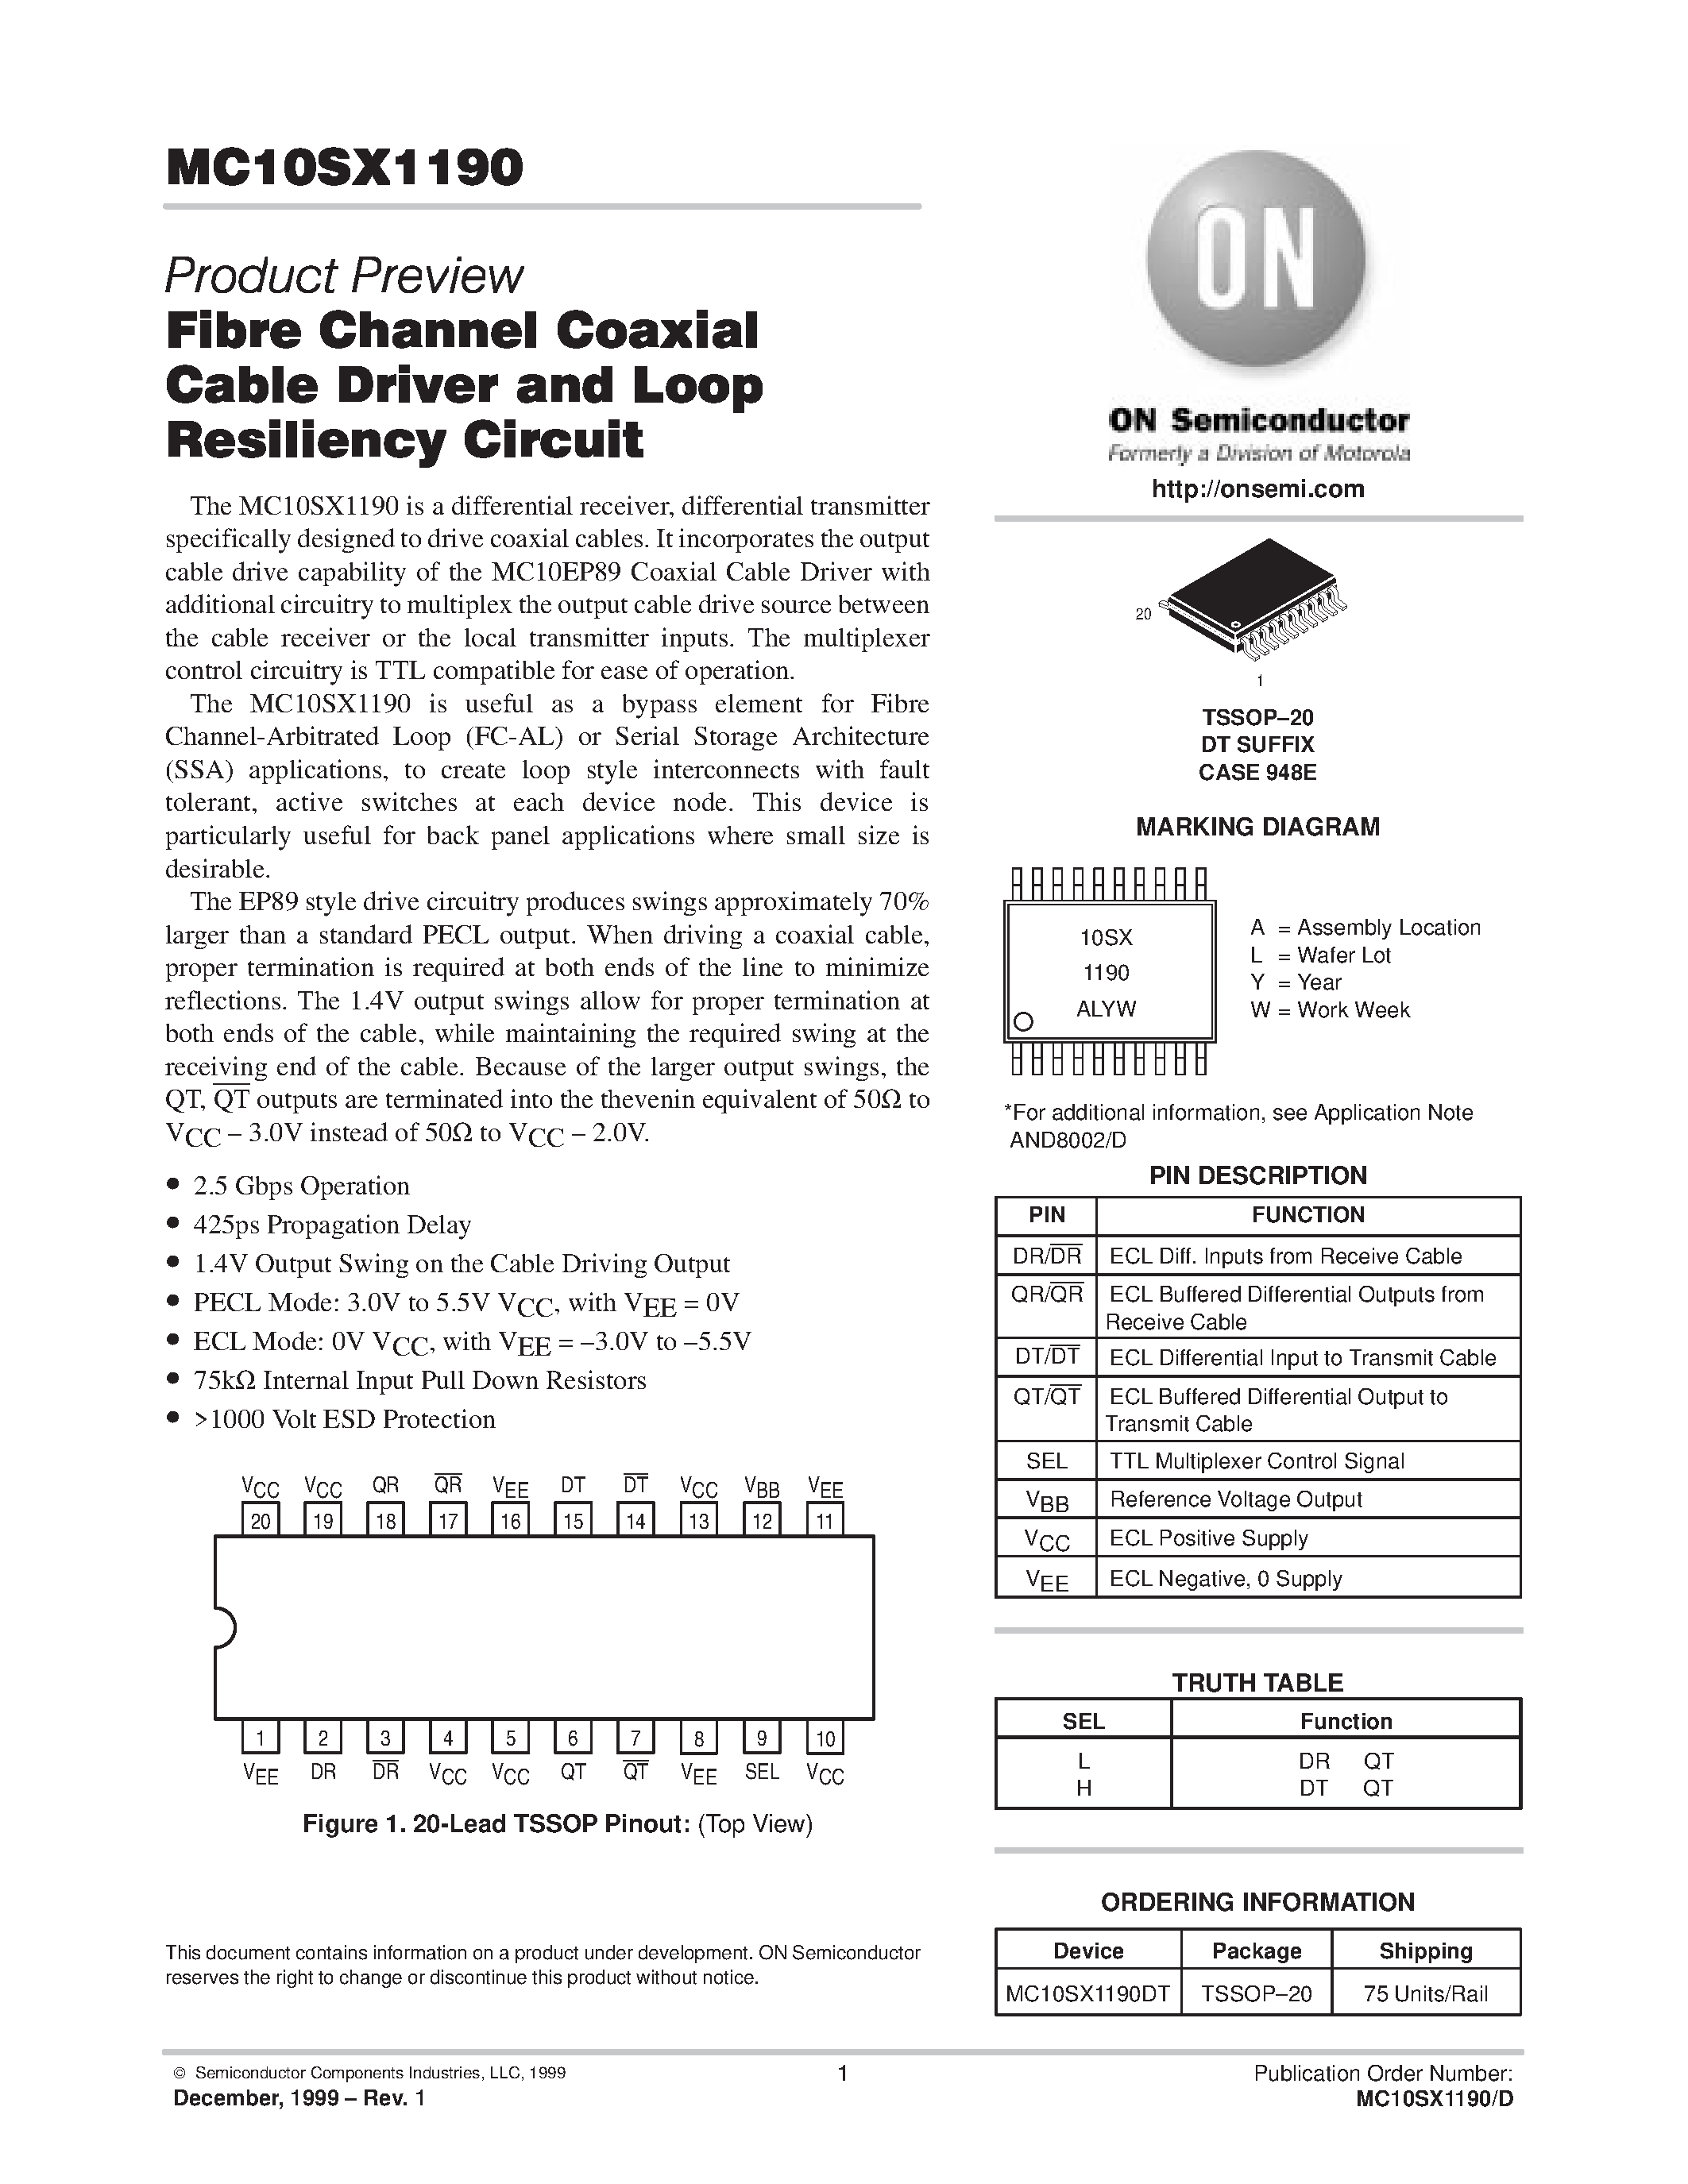 Datasheet MC10SX1190DT - Fibre Channel Coaxial Cable Driver and Loop Resiliency Circuit page 1